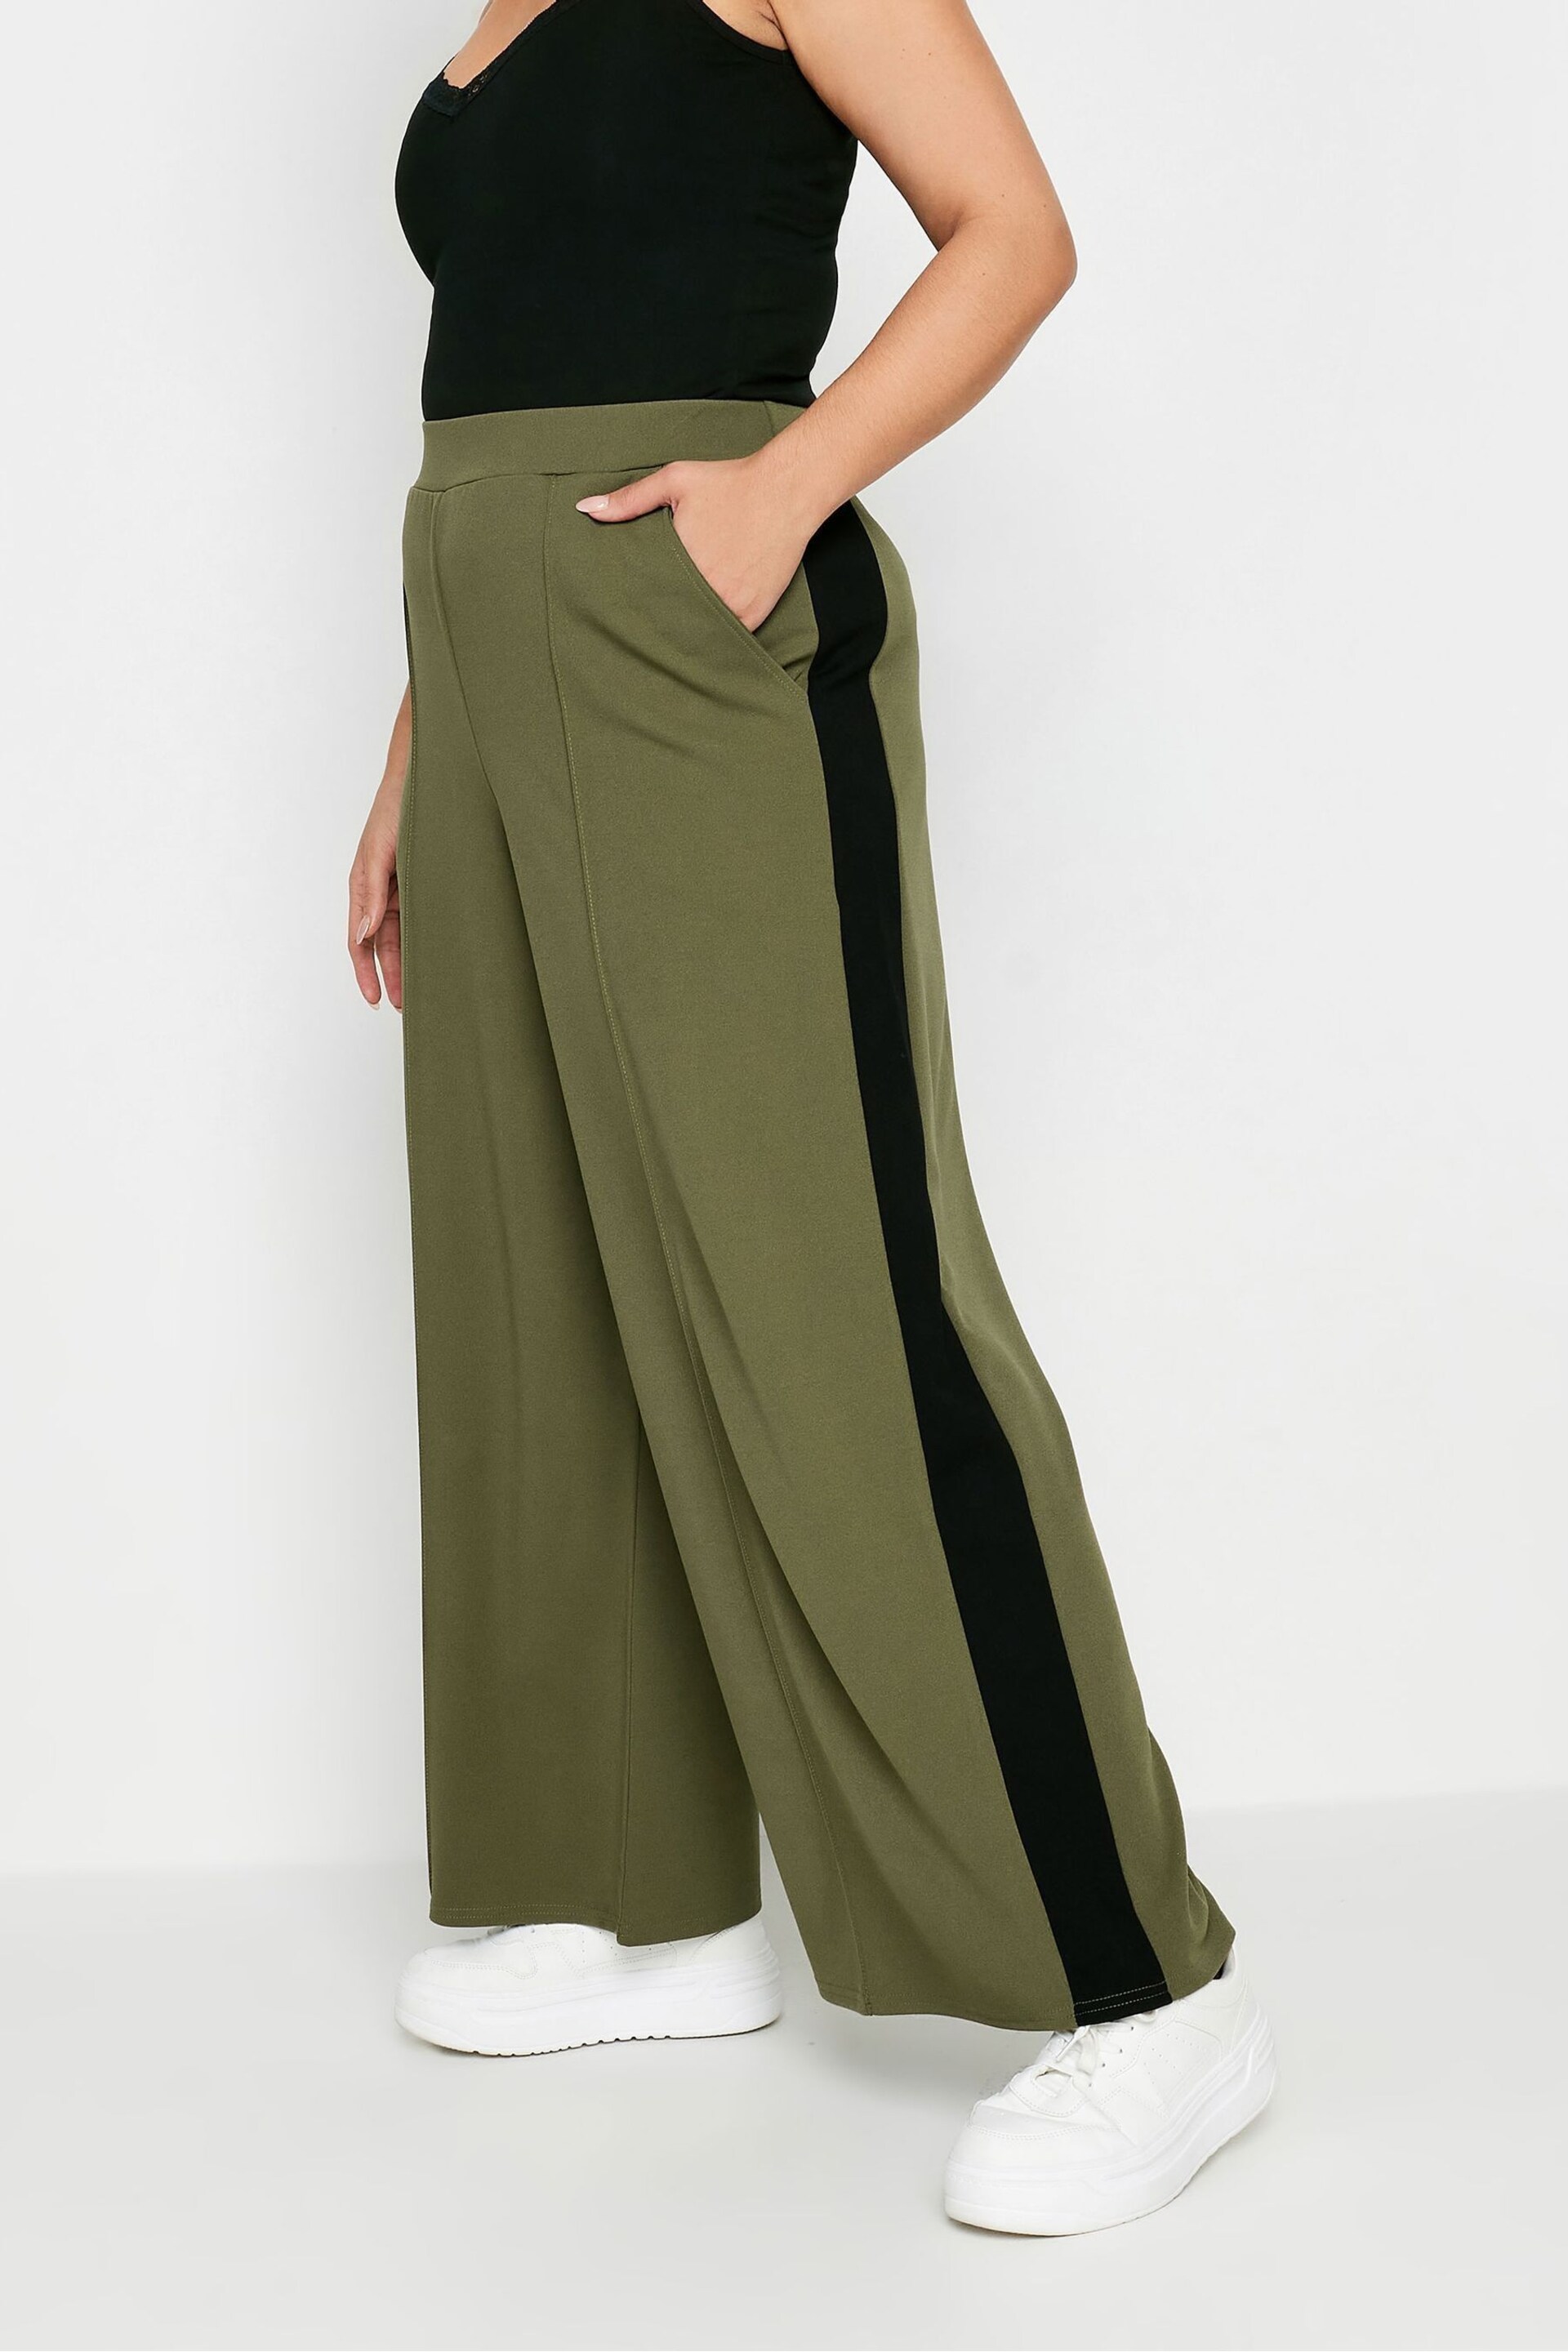 Yours Curve Green Side Stripe Wide Leg Trousers - Image 1 of 5